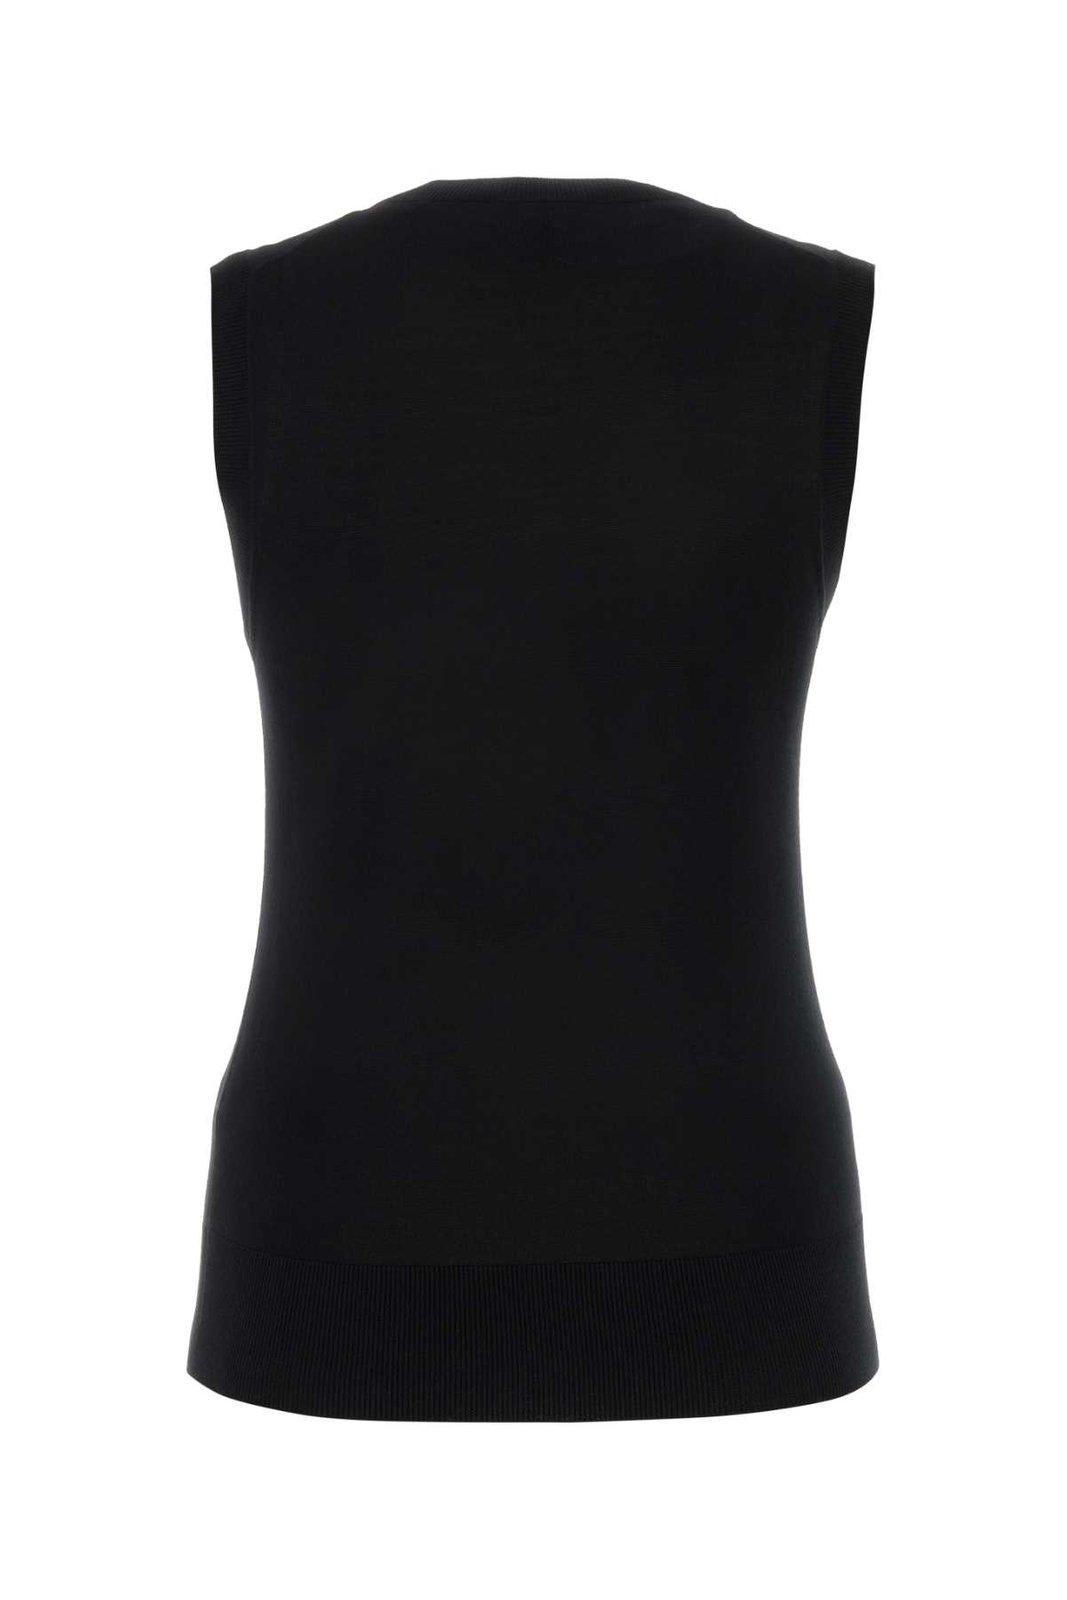 Shop Chloé Sleeveless Knitted Top In Black